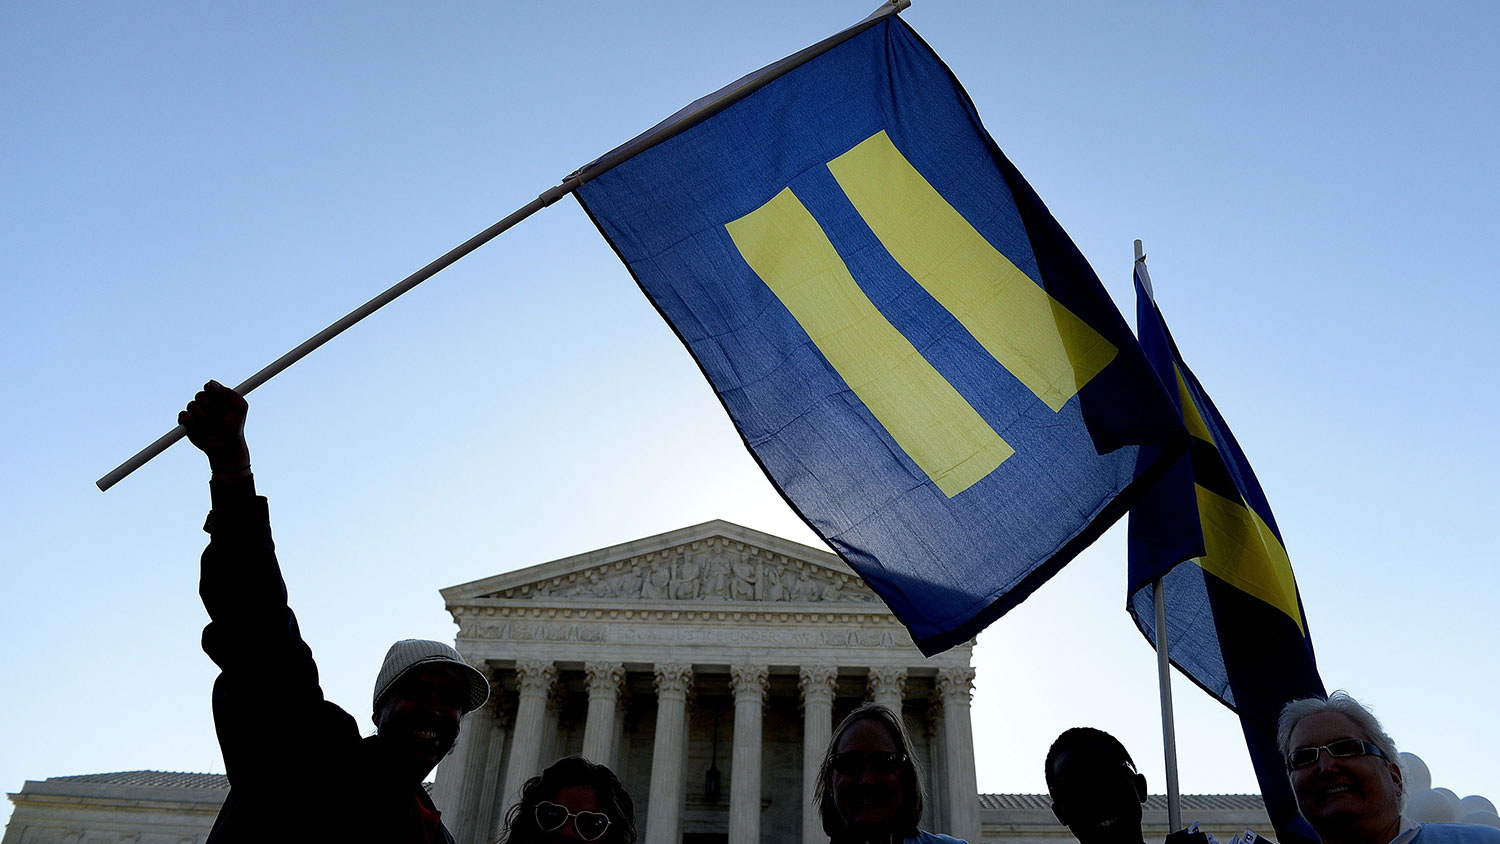 Protesters hold pro-gay rights flags outside the US Supreme Court on April 28, 2015 in Washington, DC.
